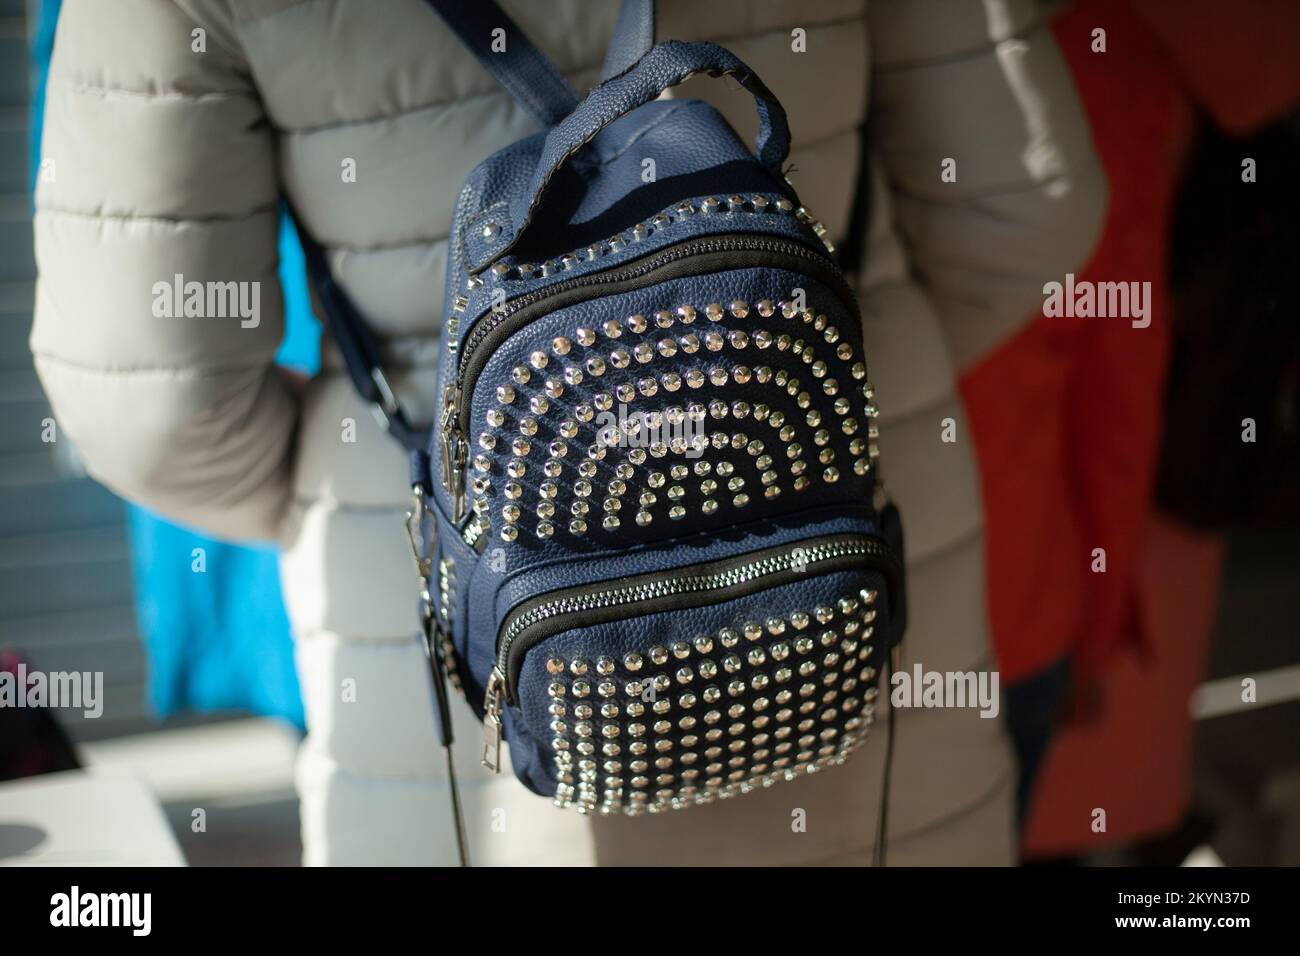 Backpack made of rivets. Pack rivets on bag. Fashionable backpack on girl. Stock Photo